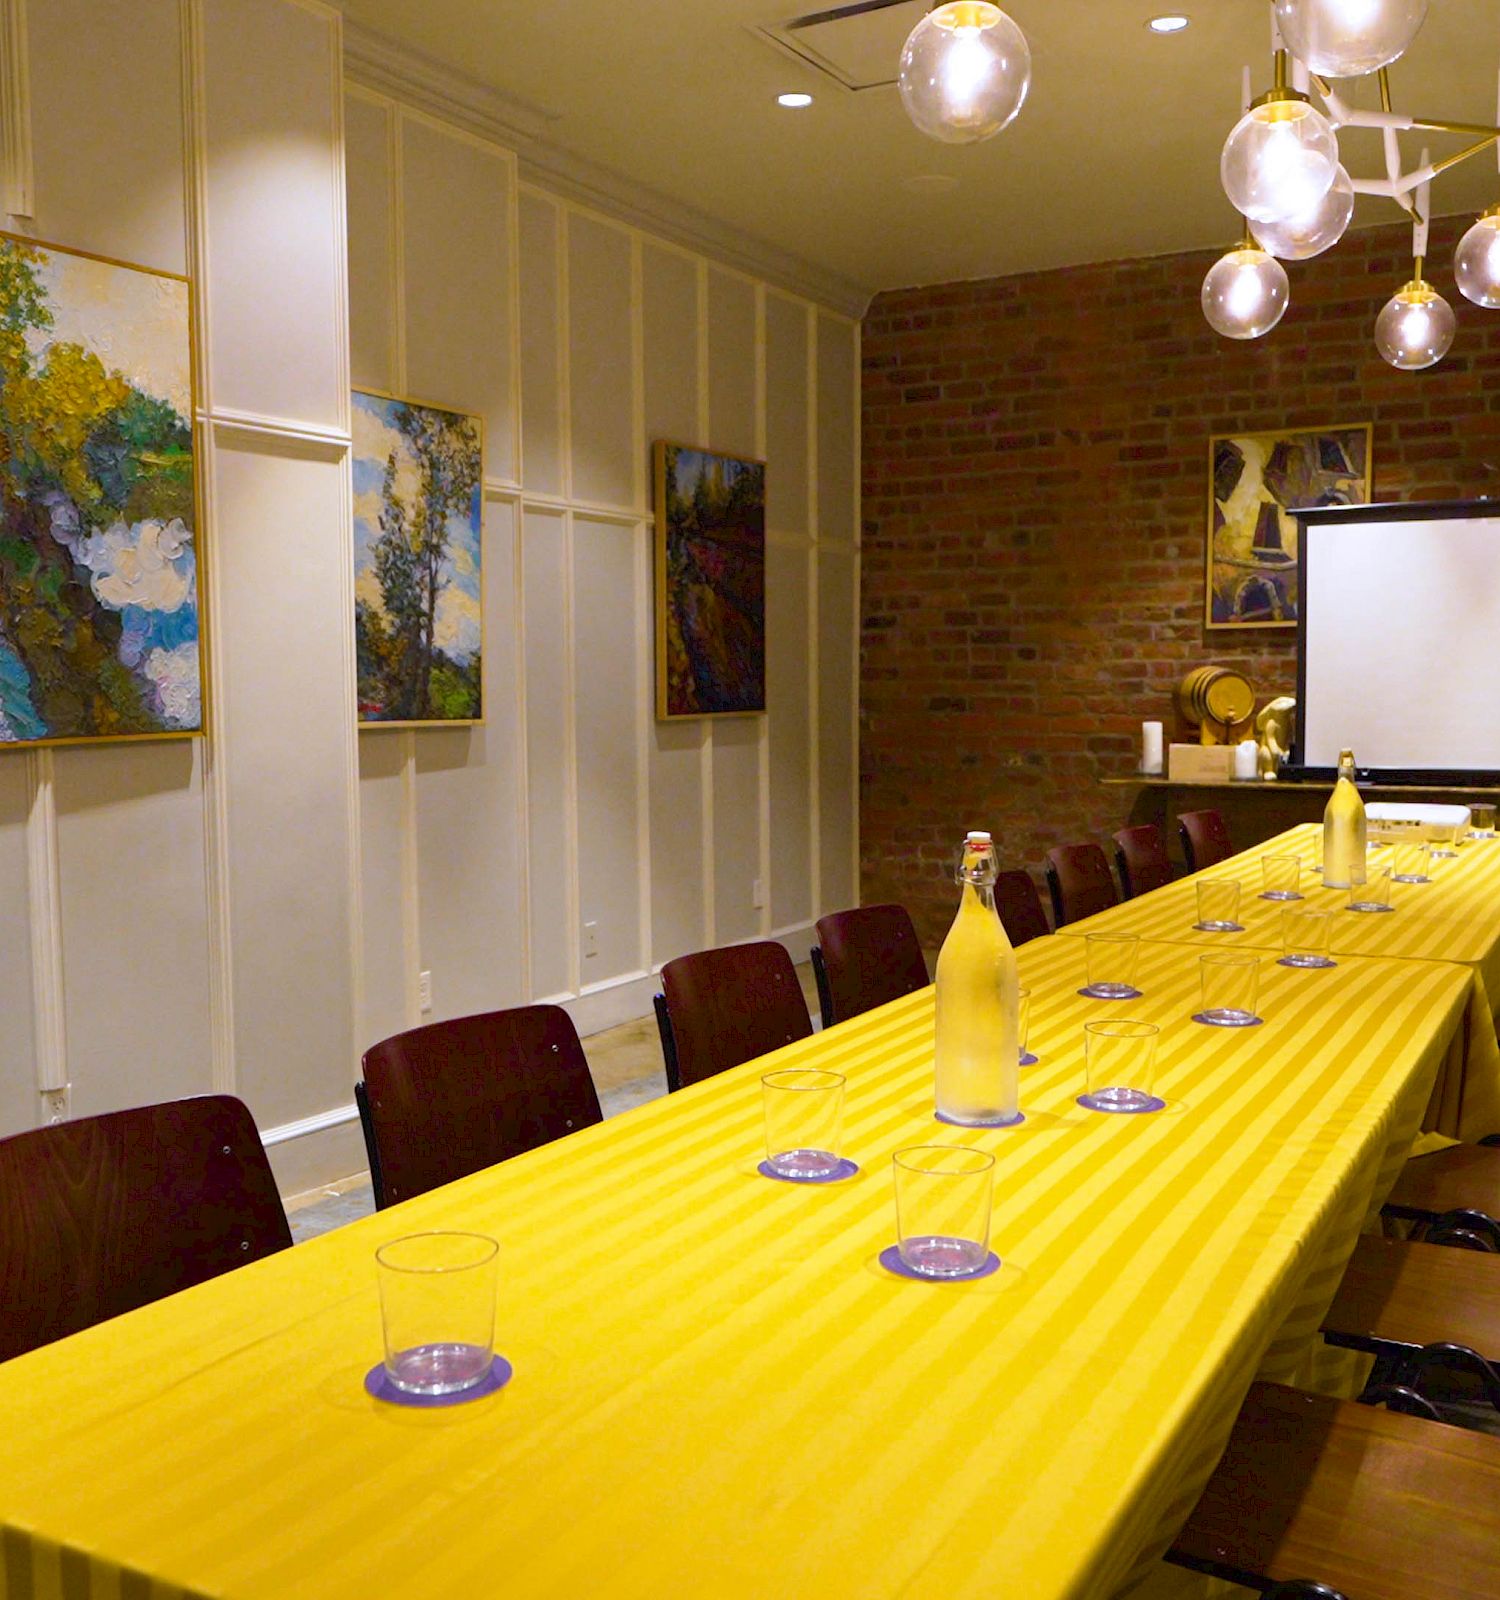 Conference room with a long table, chairs, art on walls, and a projection